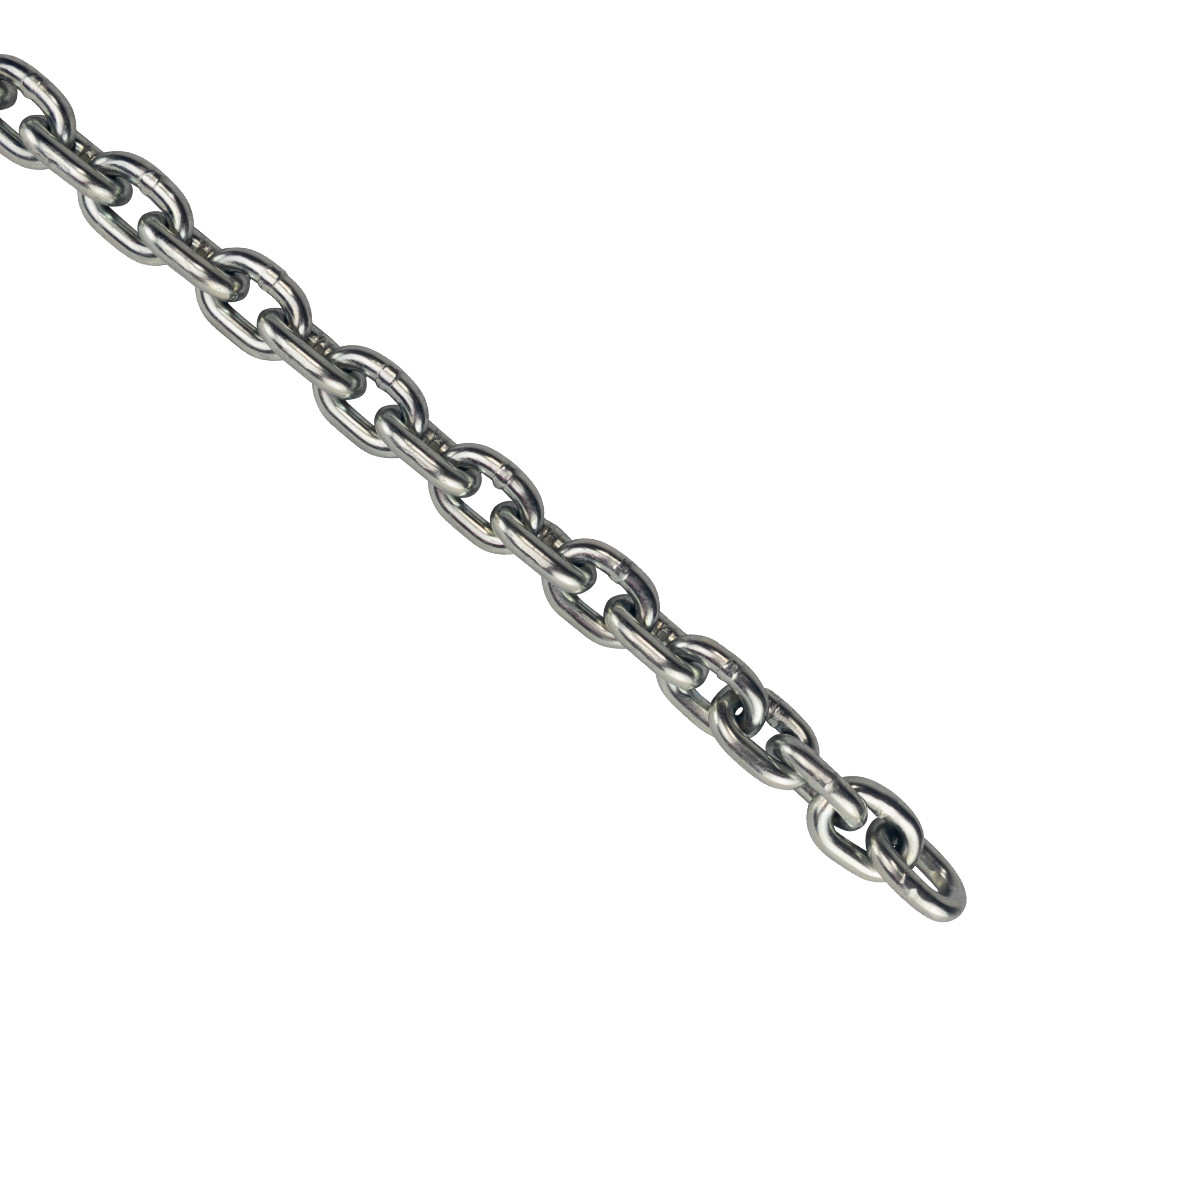 Safety Swing Chain - 5/16"